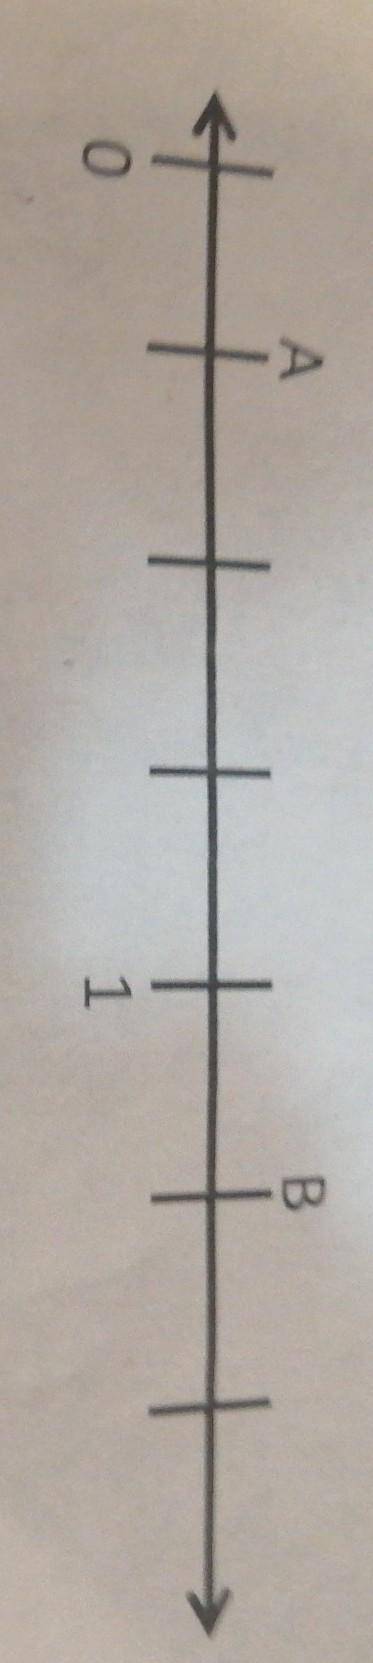 (this is for my sister in 3rd grade) What is the distance between point A and point B?